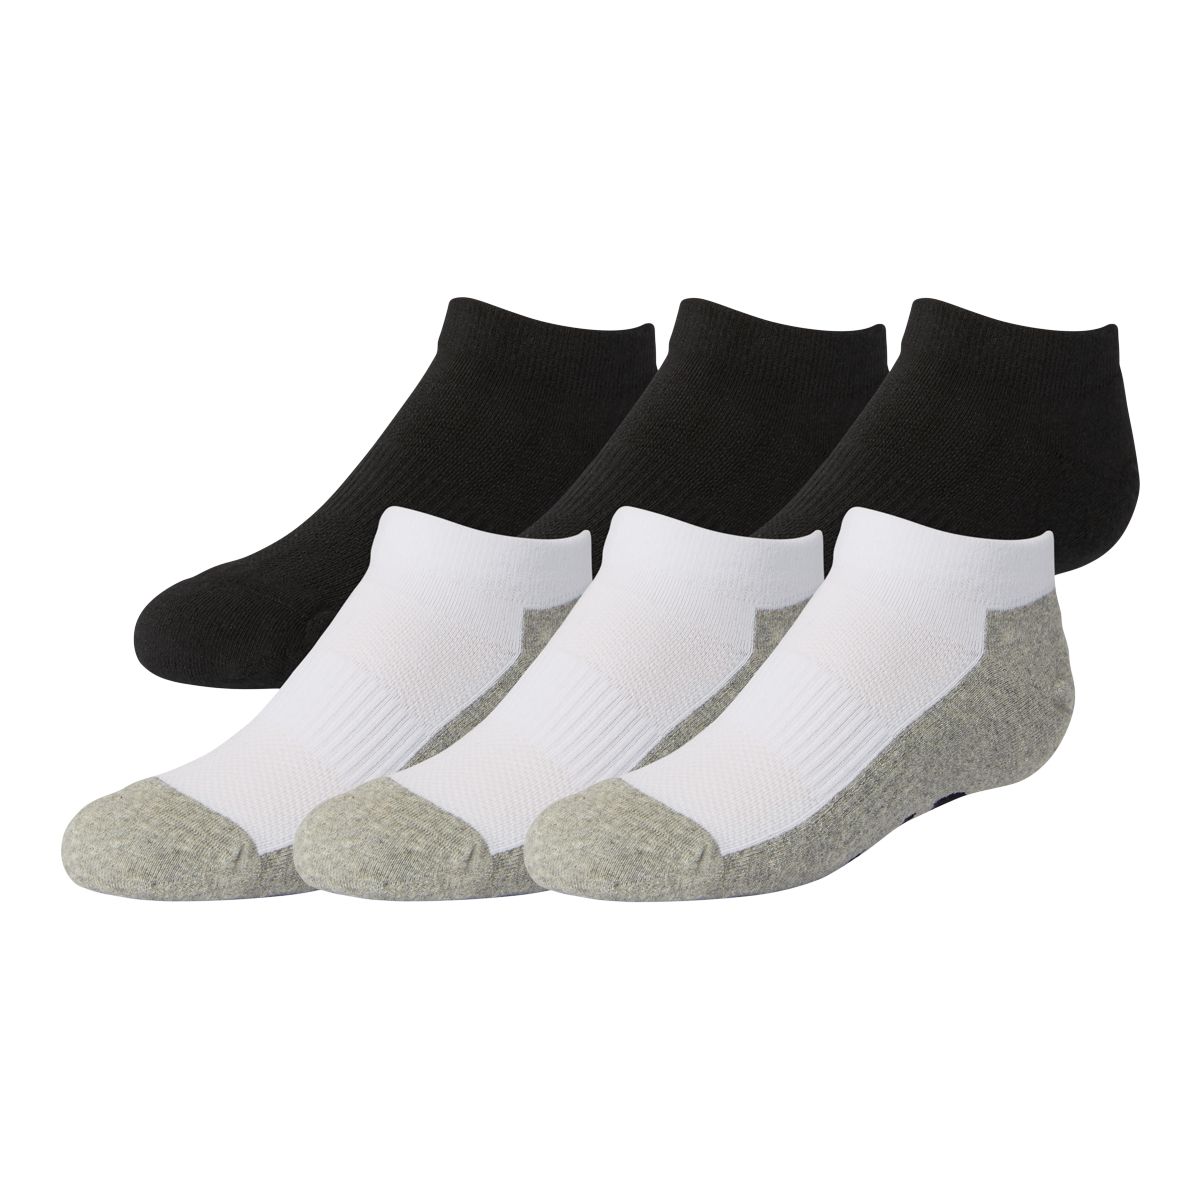 Image of FWD Youth Mesh No Show Socks - 6 Pack